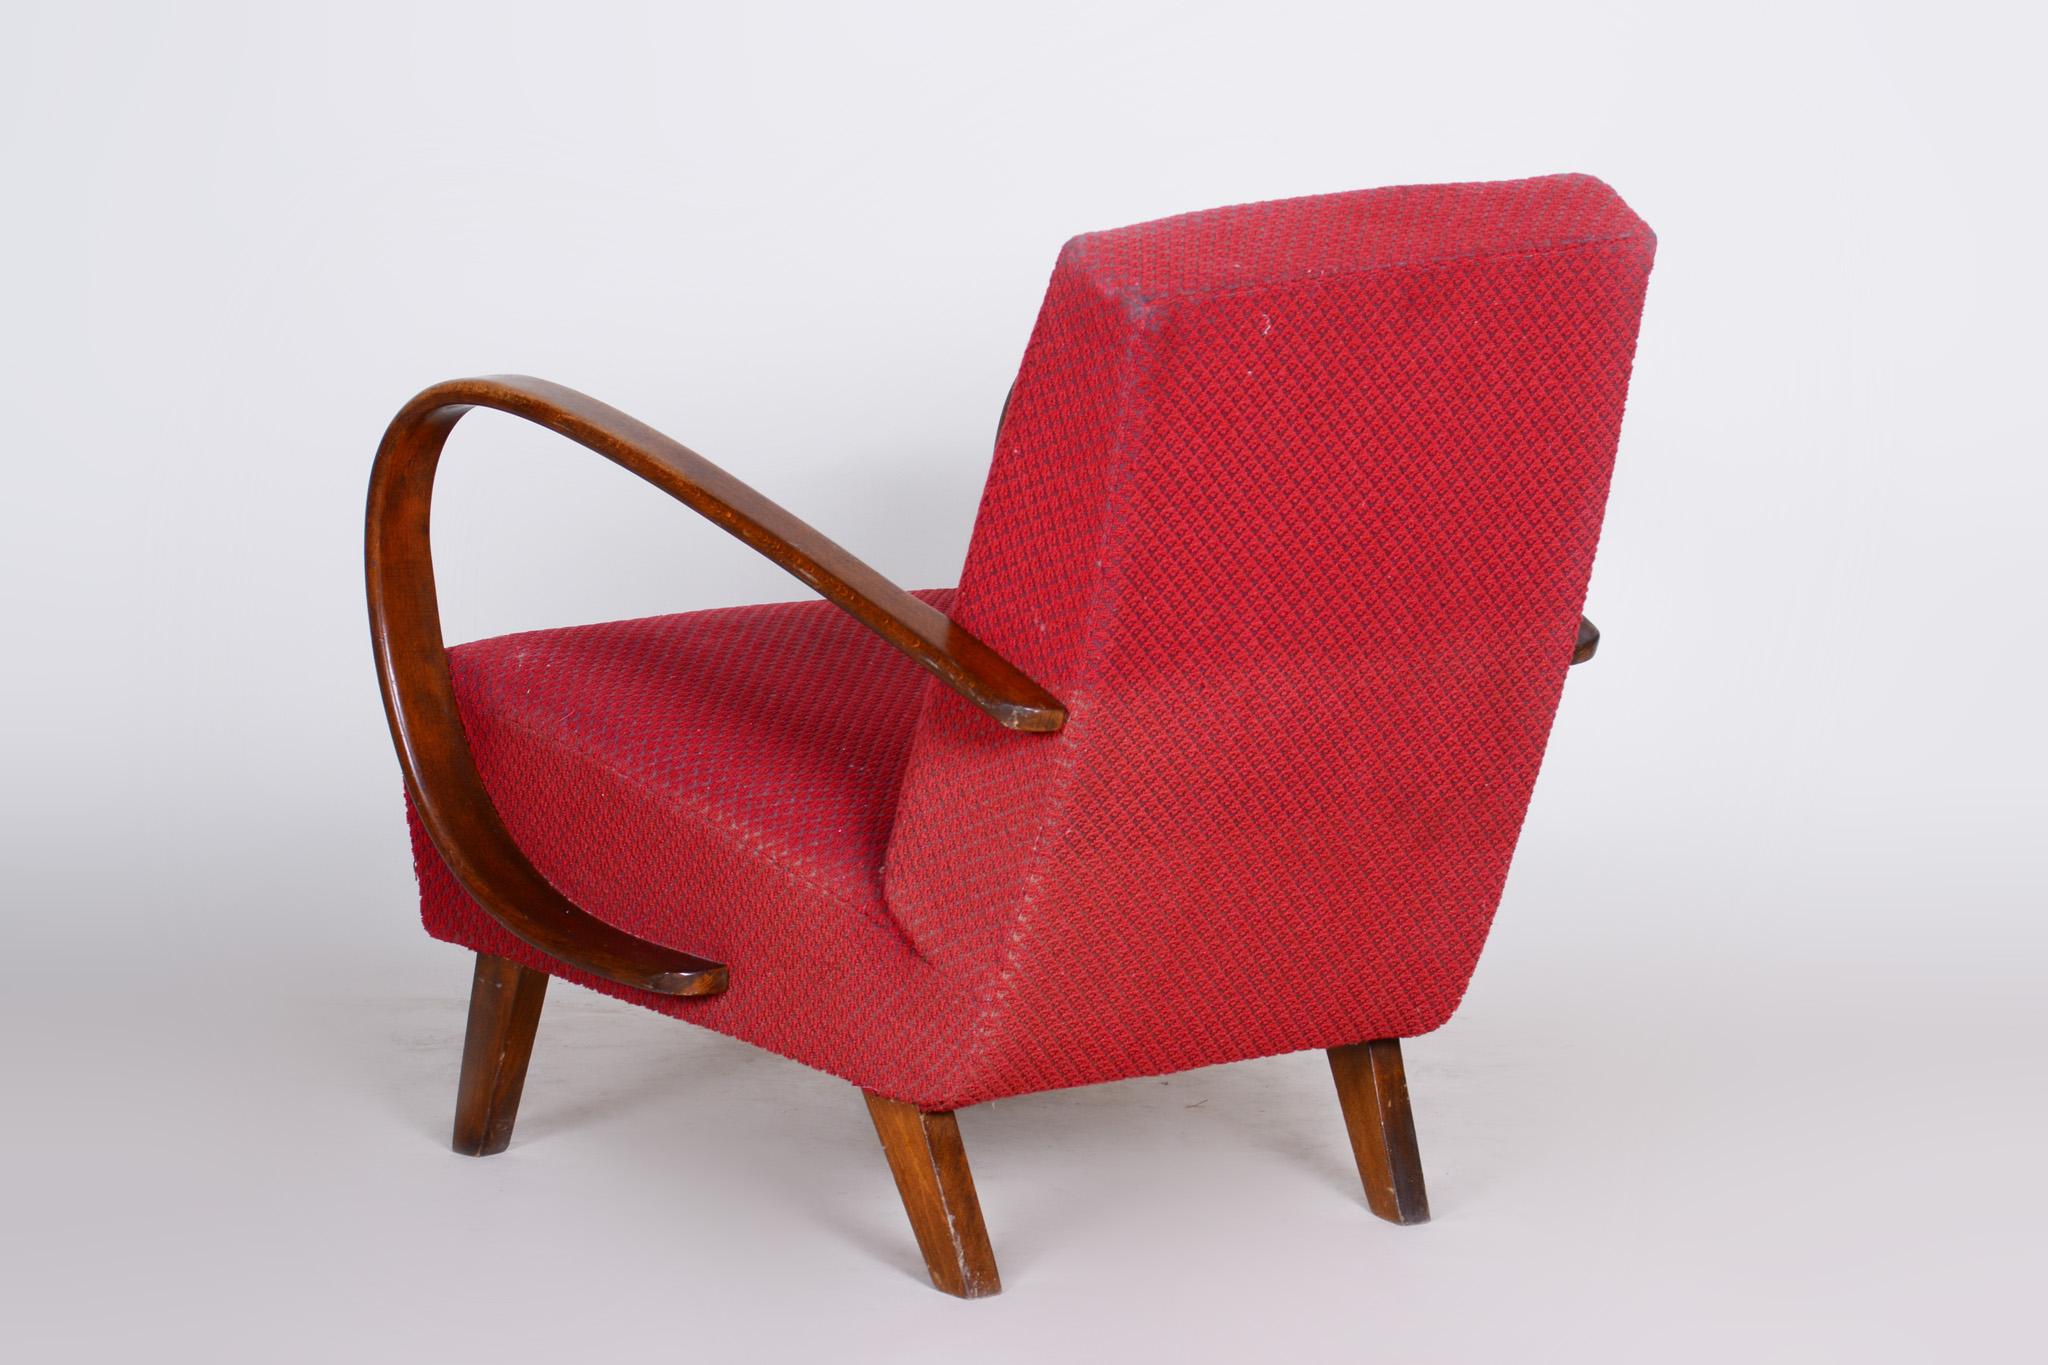 Red Armchair, Made in Czechia, 1930s, Original Condition, Art Deco Style For Sale 1